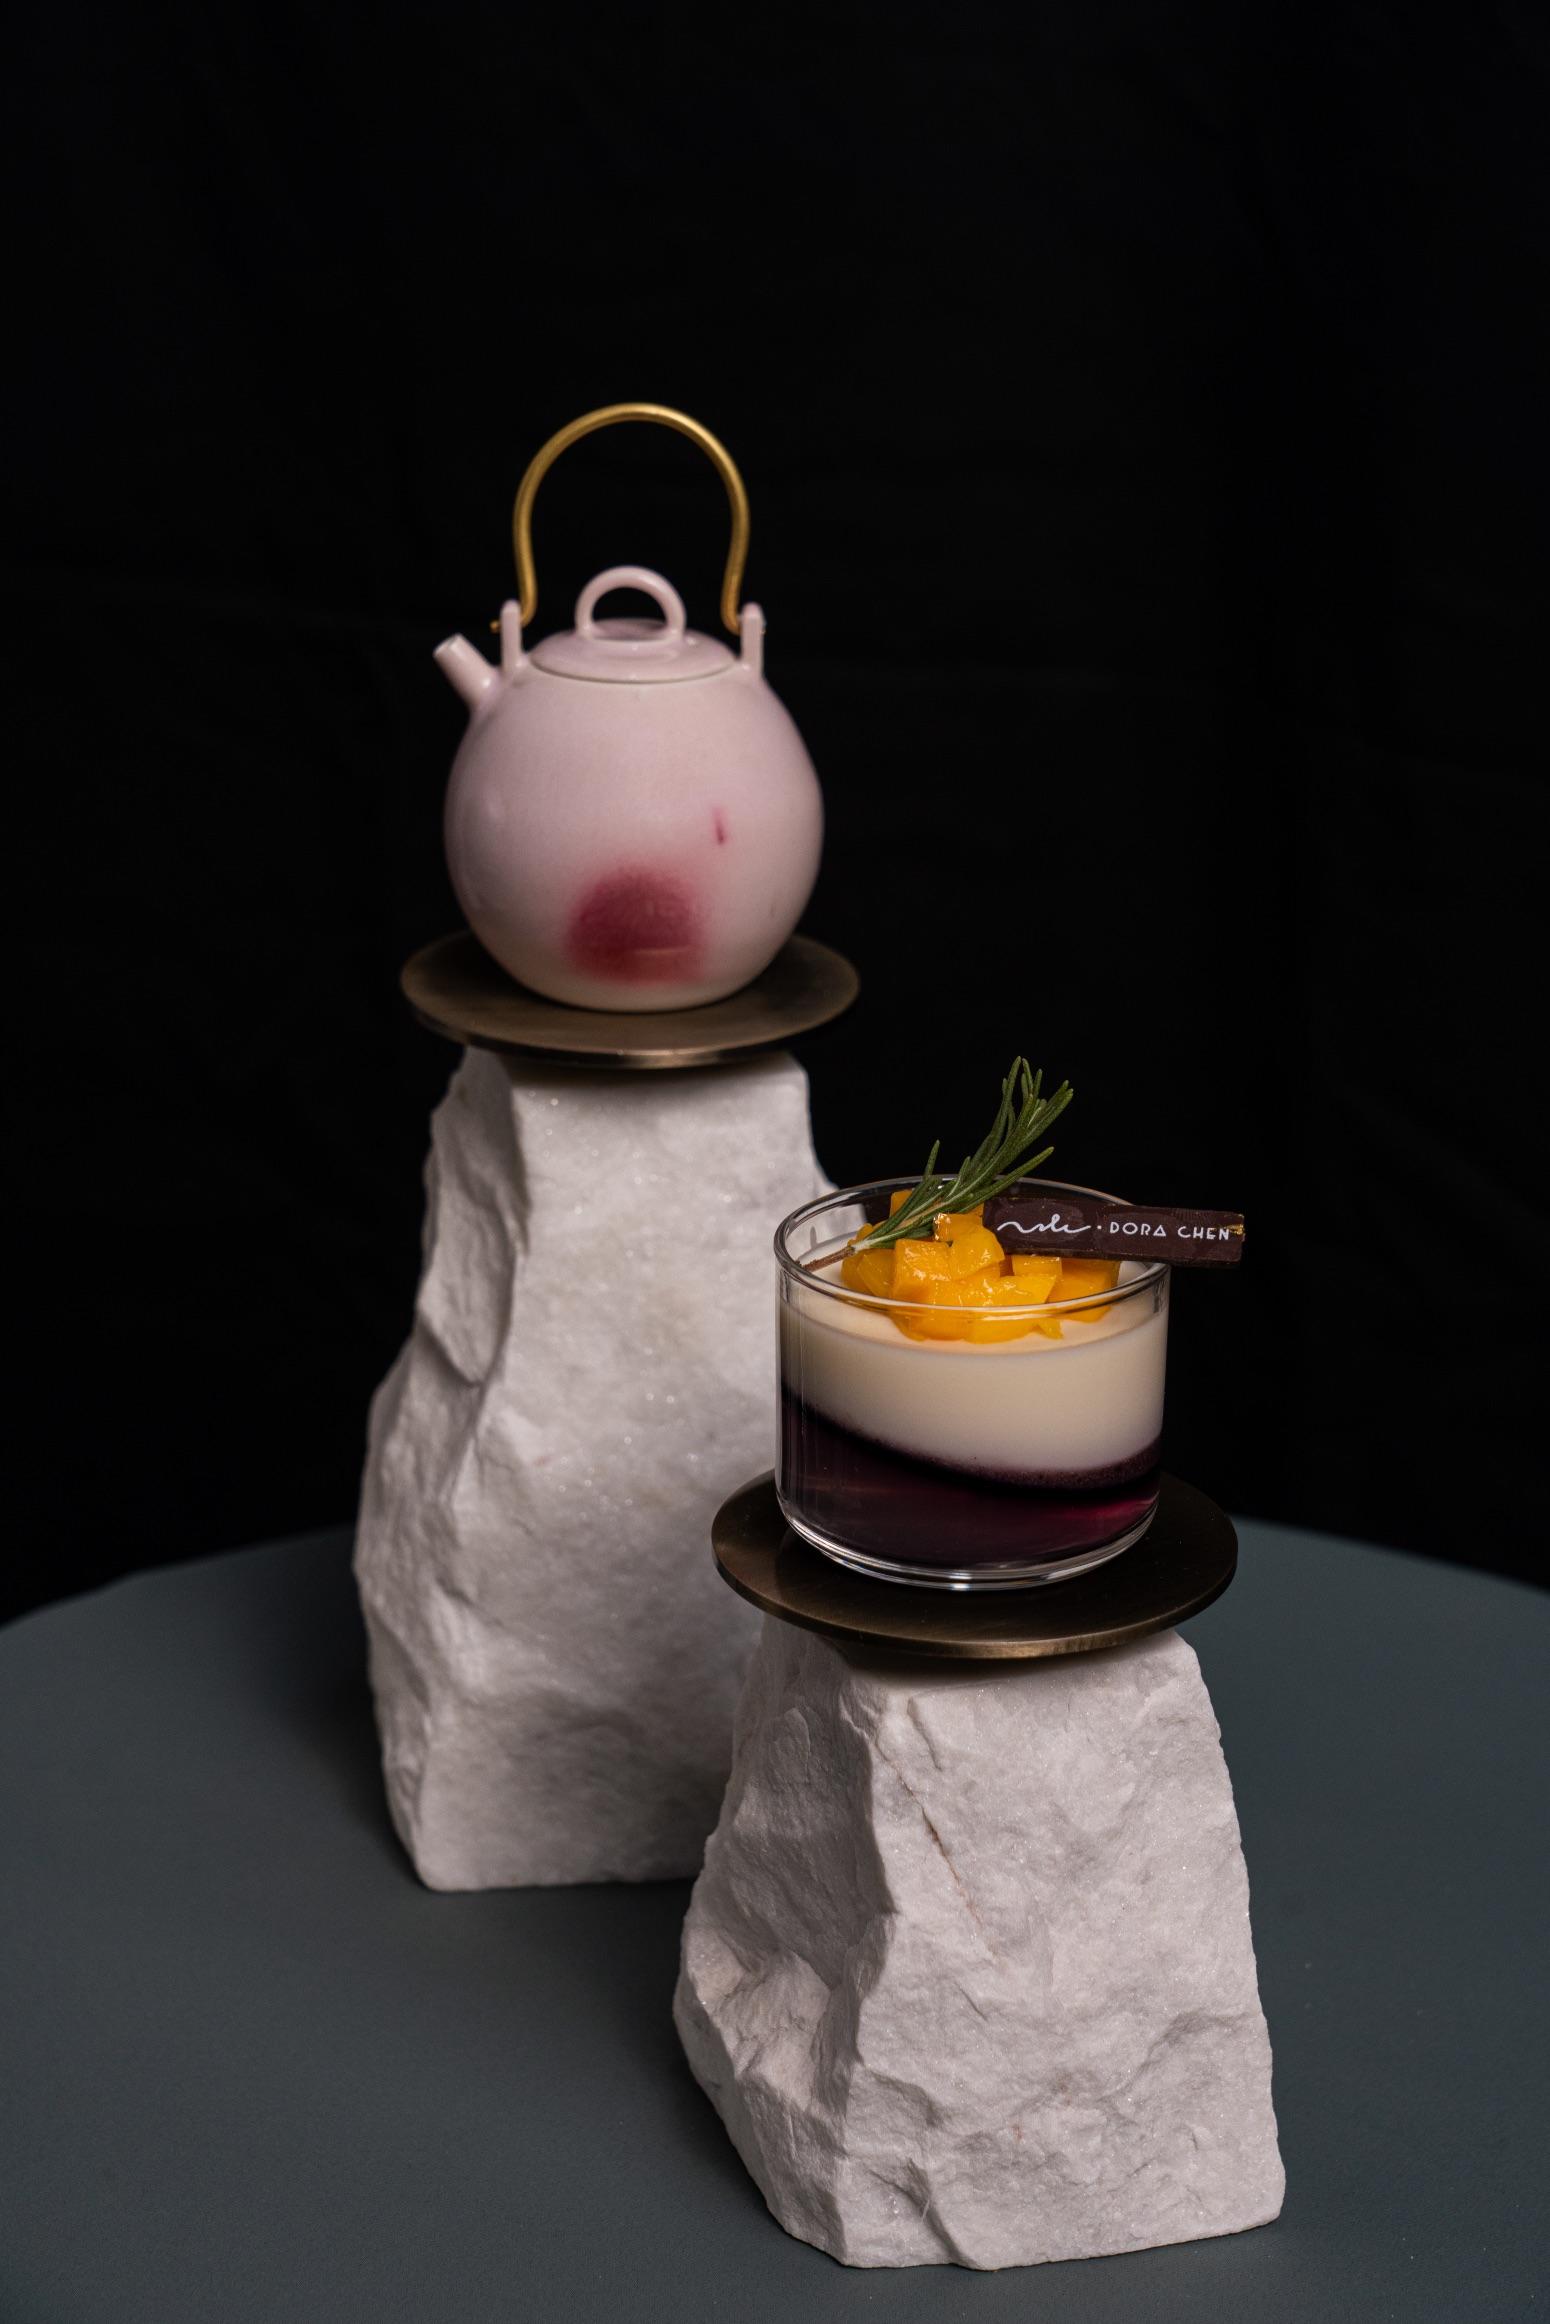 A pink glazed ceramic teapot with a brass handle and a panna cotta dessert in a small glass cup is displayed on two stone stands.